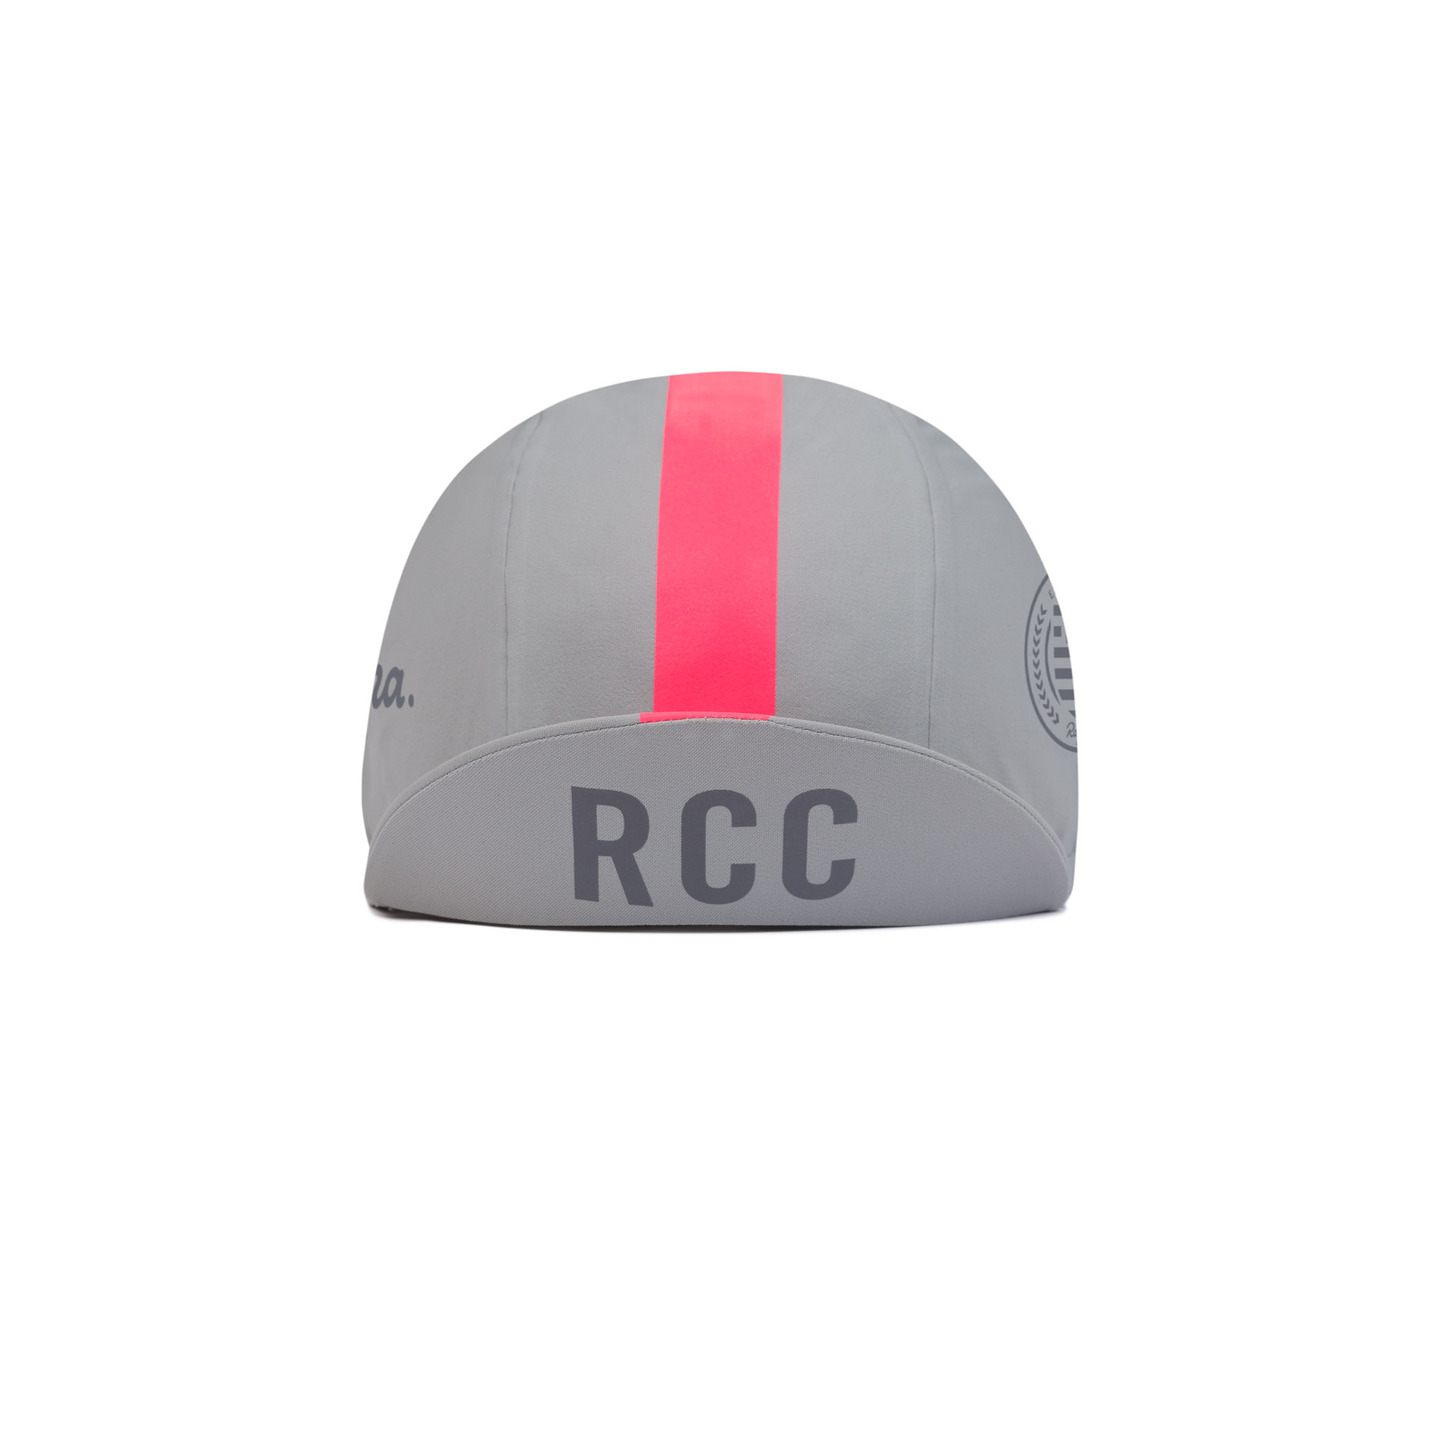 Rapha Real RCC Pro Team Cap Limited Edition Competition Cycling Cap Quick Dry Cap Spot